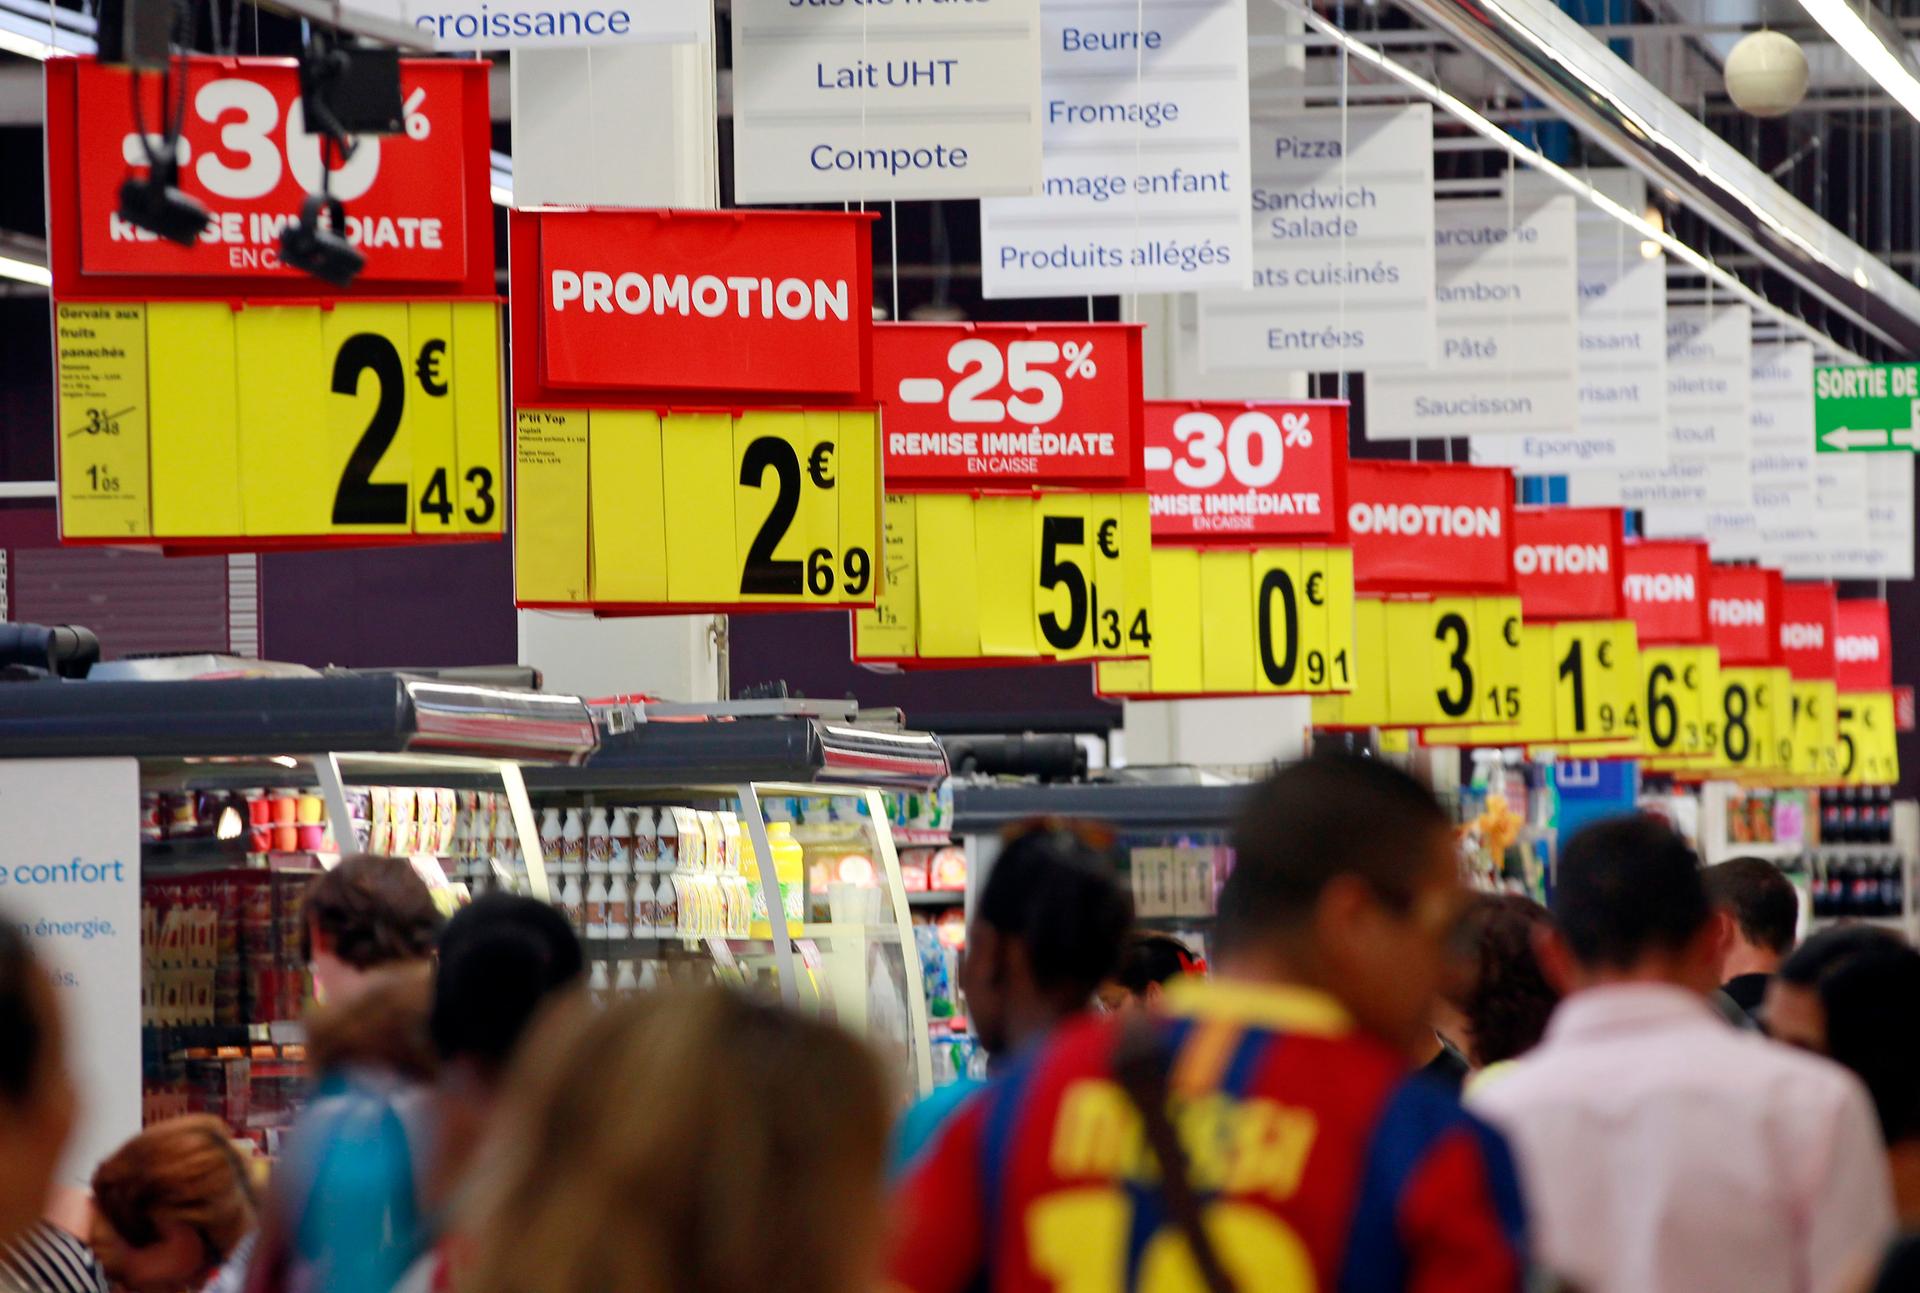 Customers walk past discount signs in a supermarket in Nice August 23, 2012